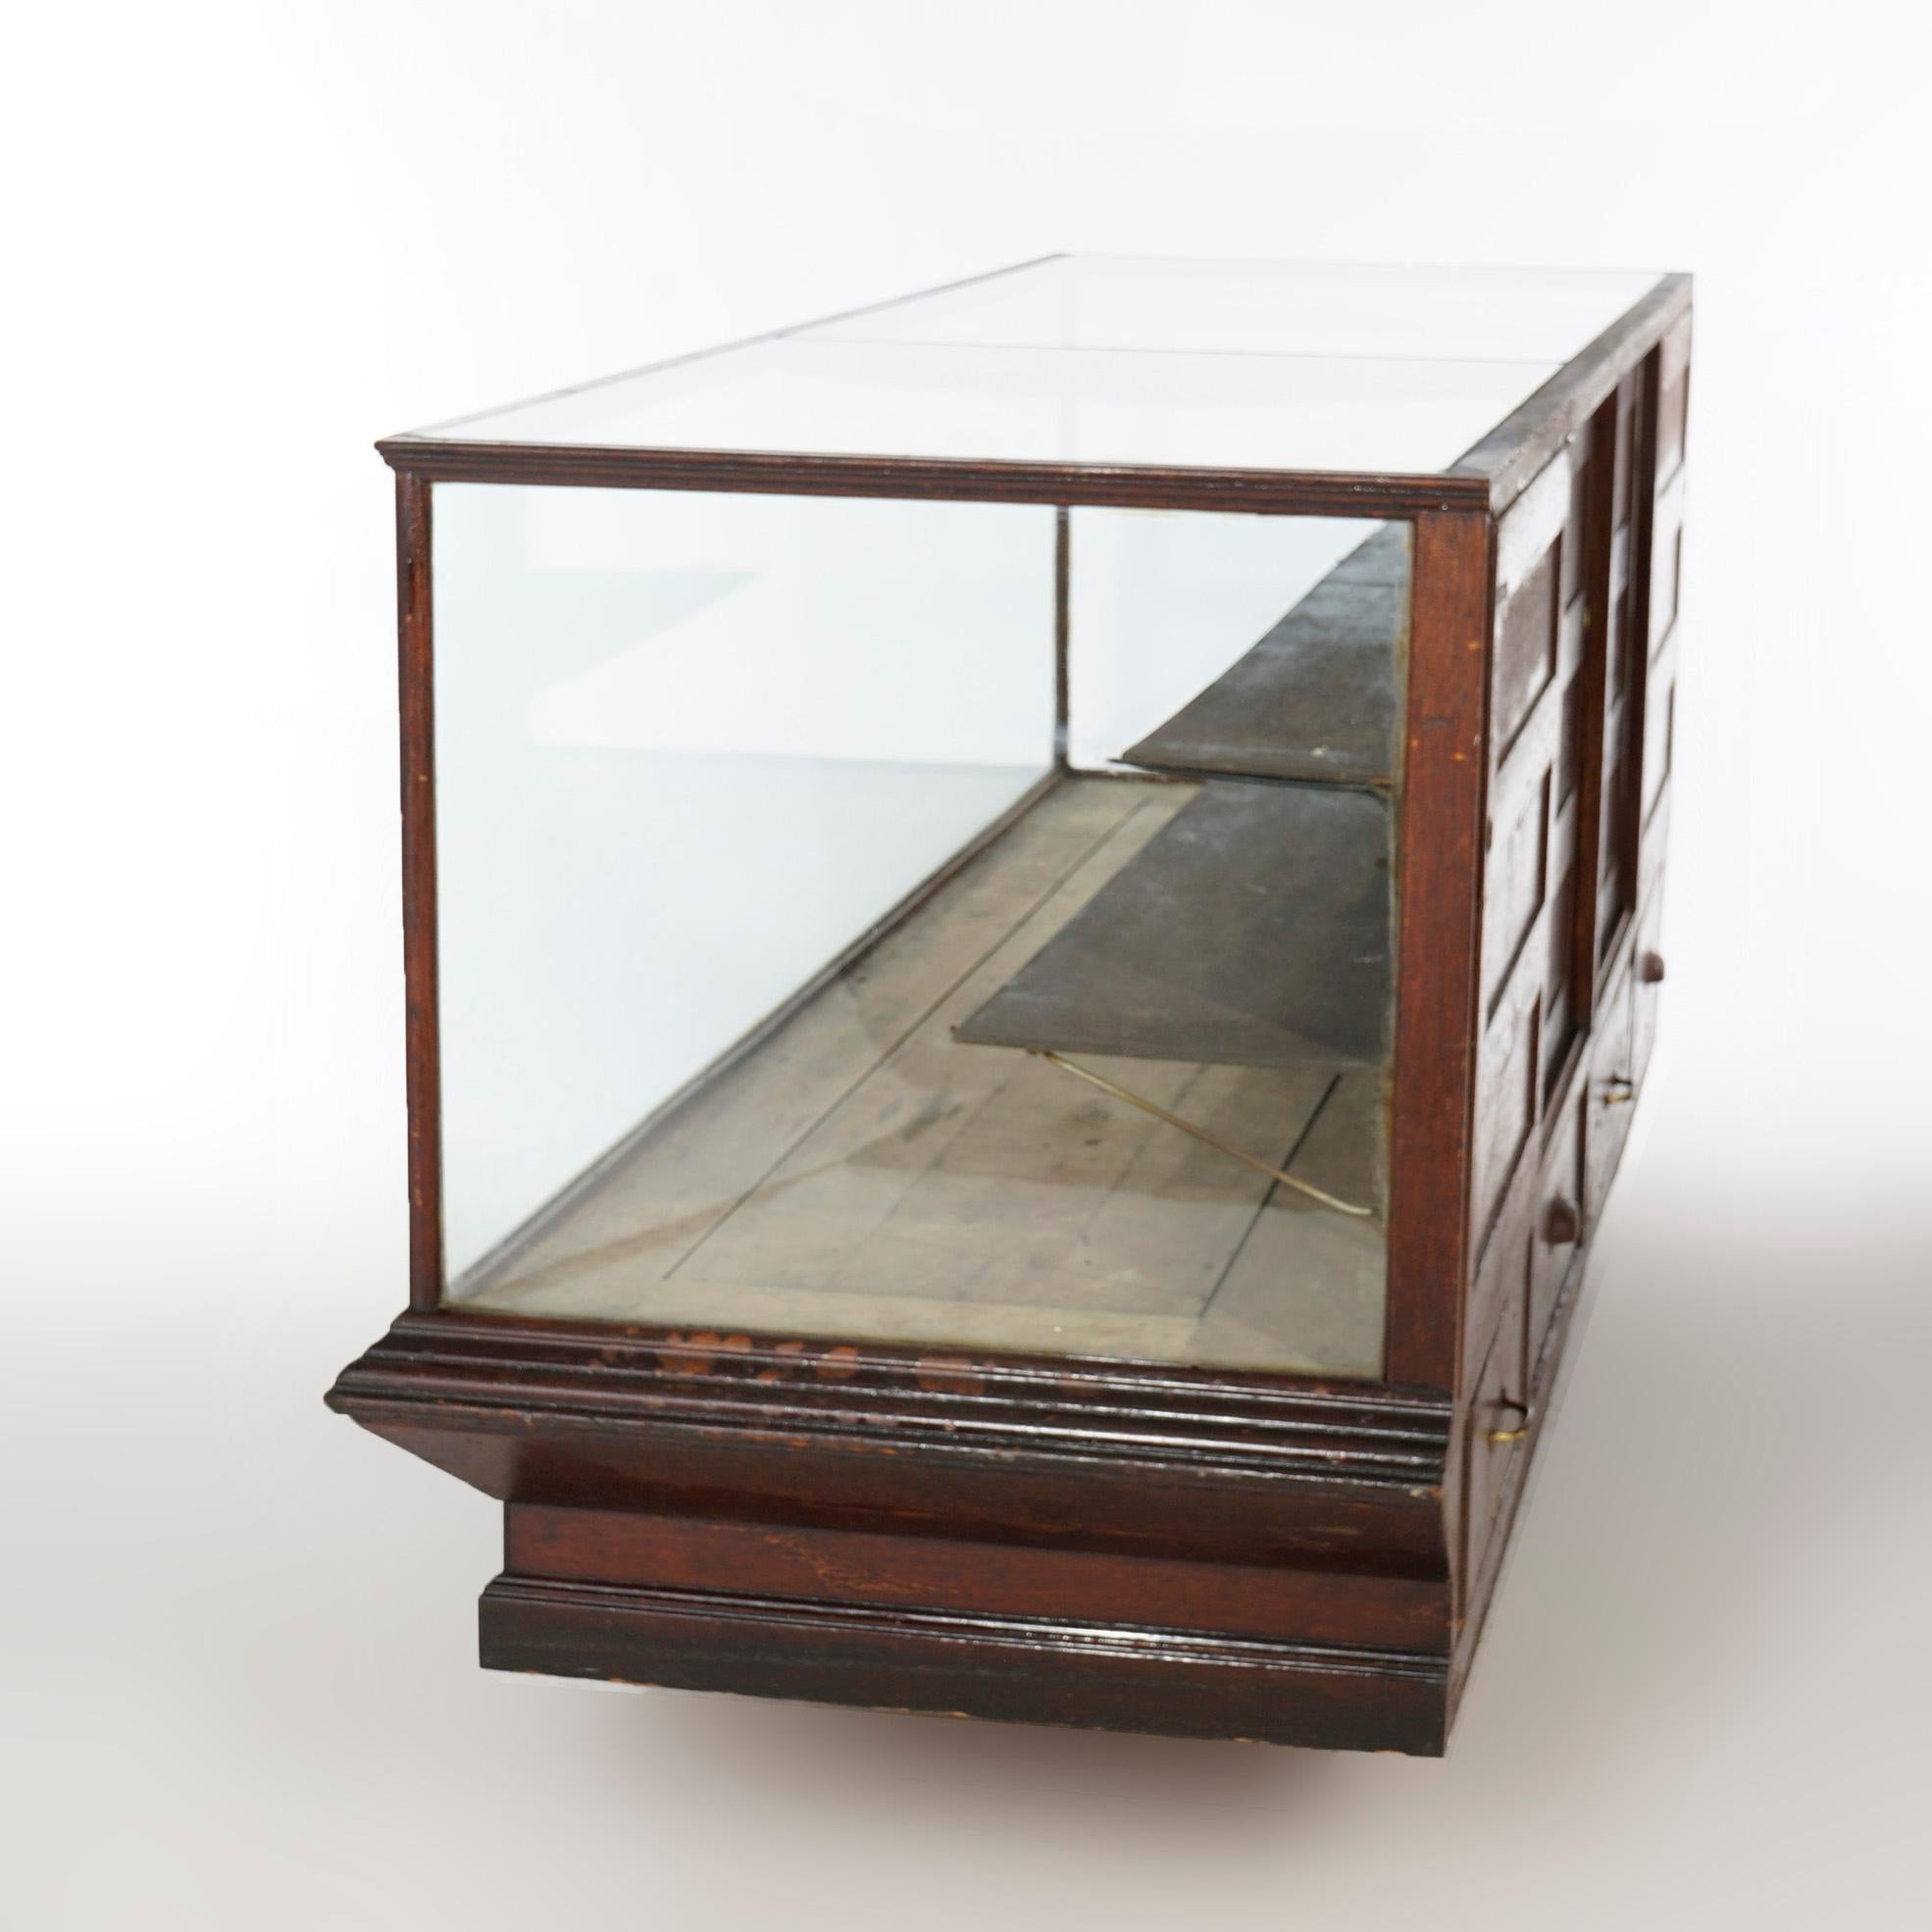 20th Century Antique Oak & Glass Country Store Counter Showcase Display Cabinet, circa 1900